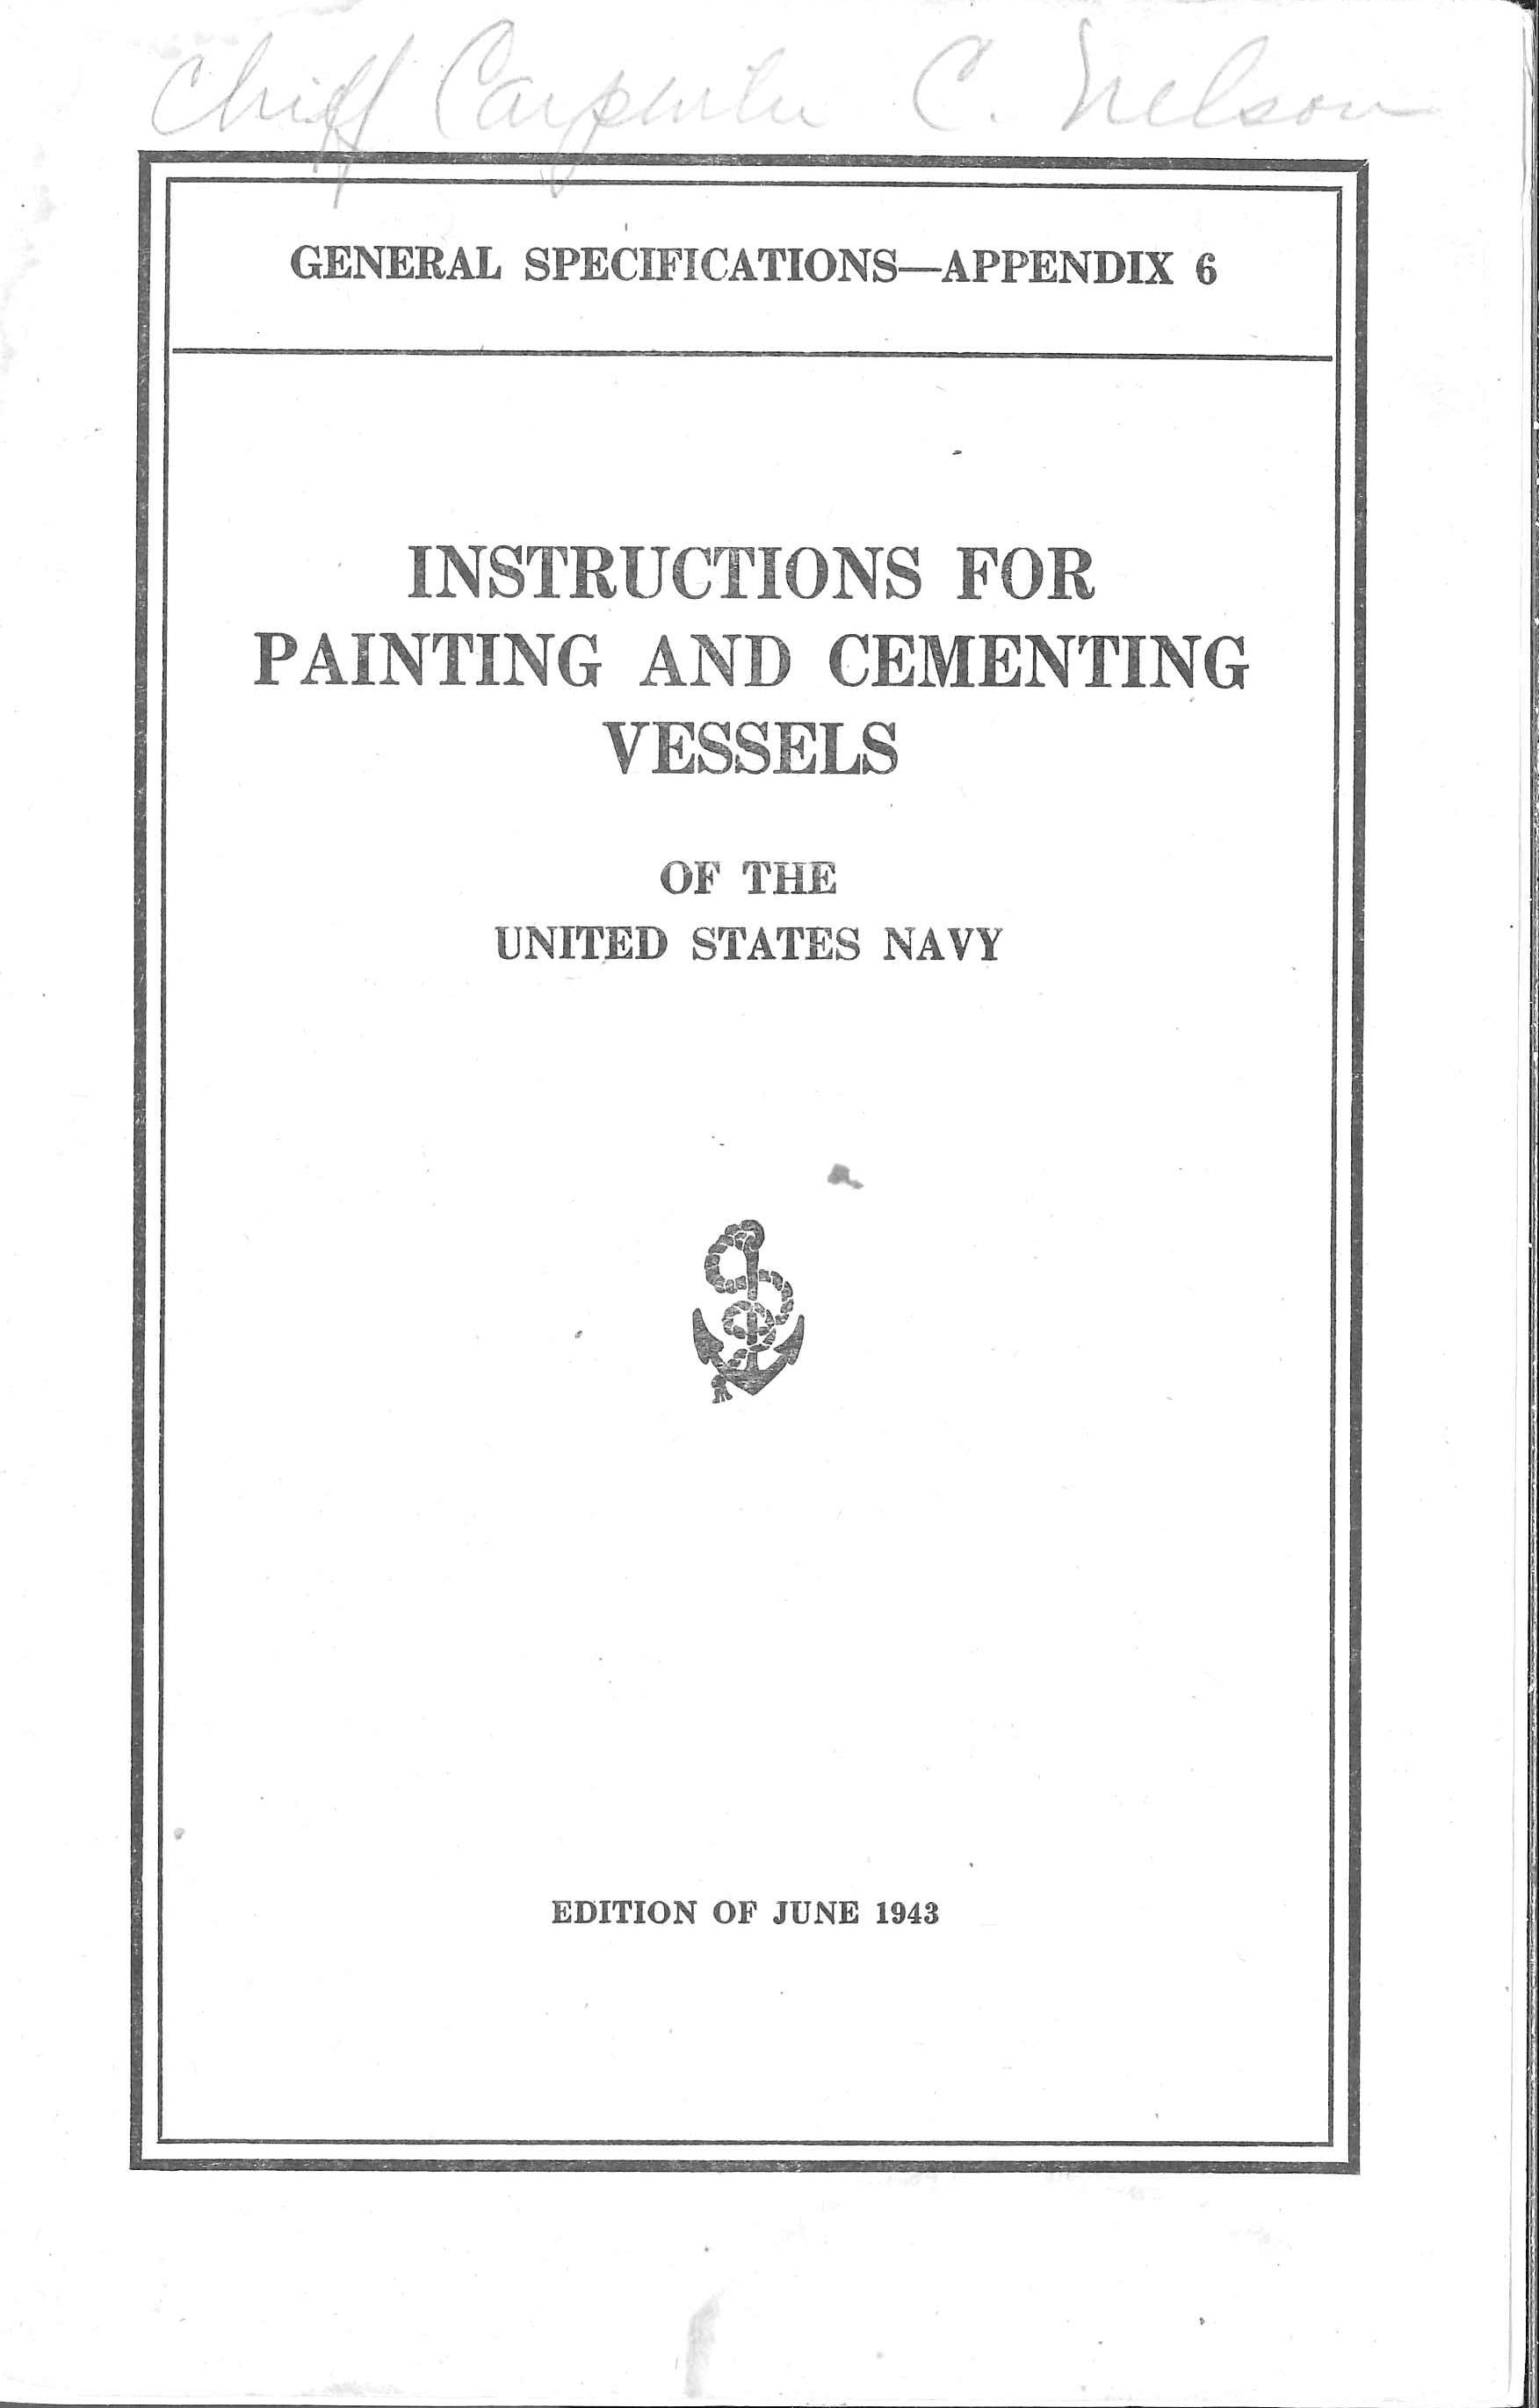 Instructions for Painting and Cementing Vessels of the United States